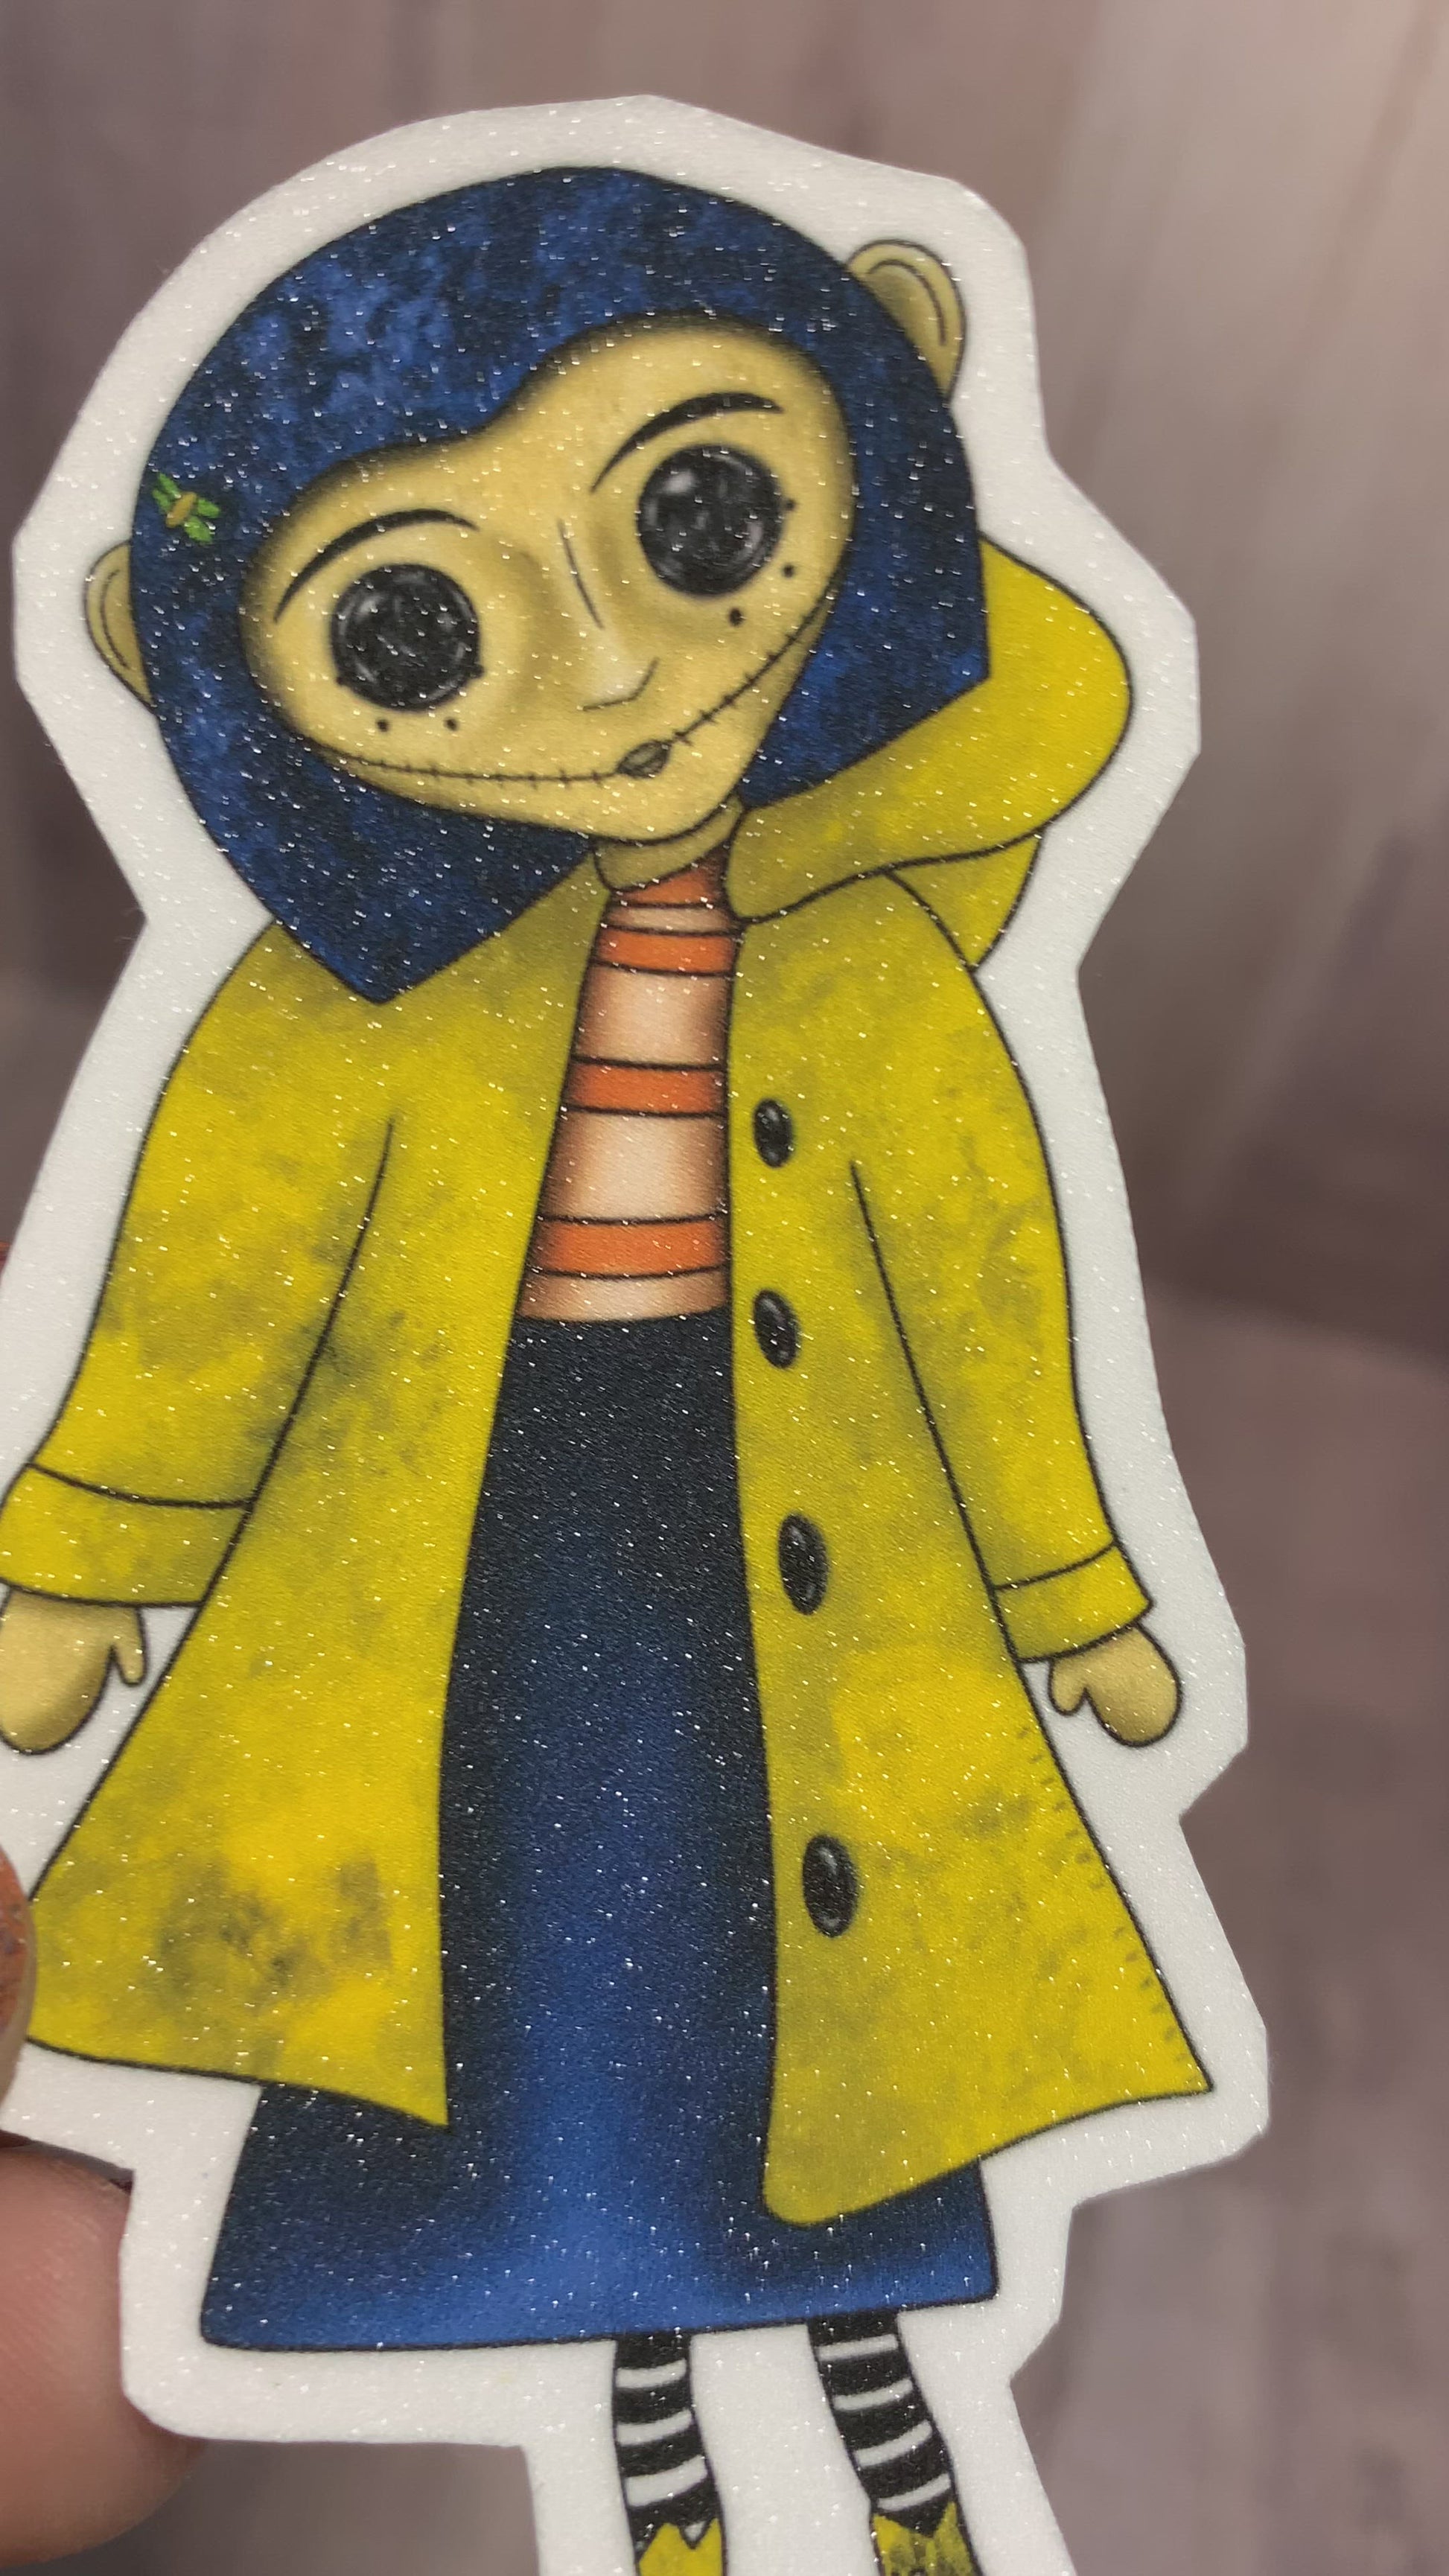 coraline keychain accessories buttons other mother seeking stone button key gifts coraline doll waterproof sticker weatherproof hand made